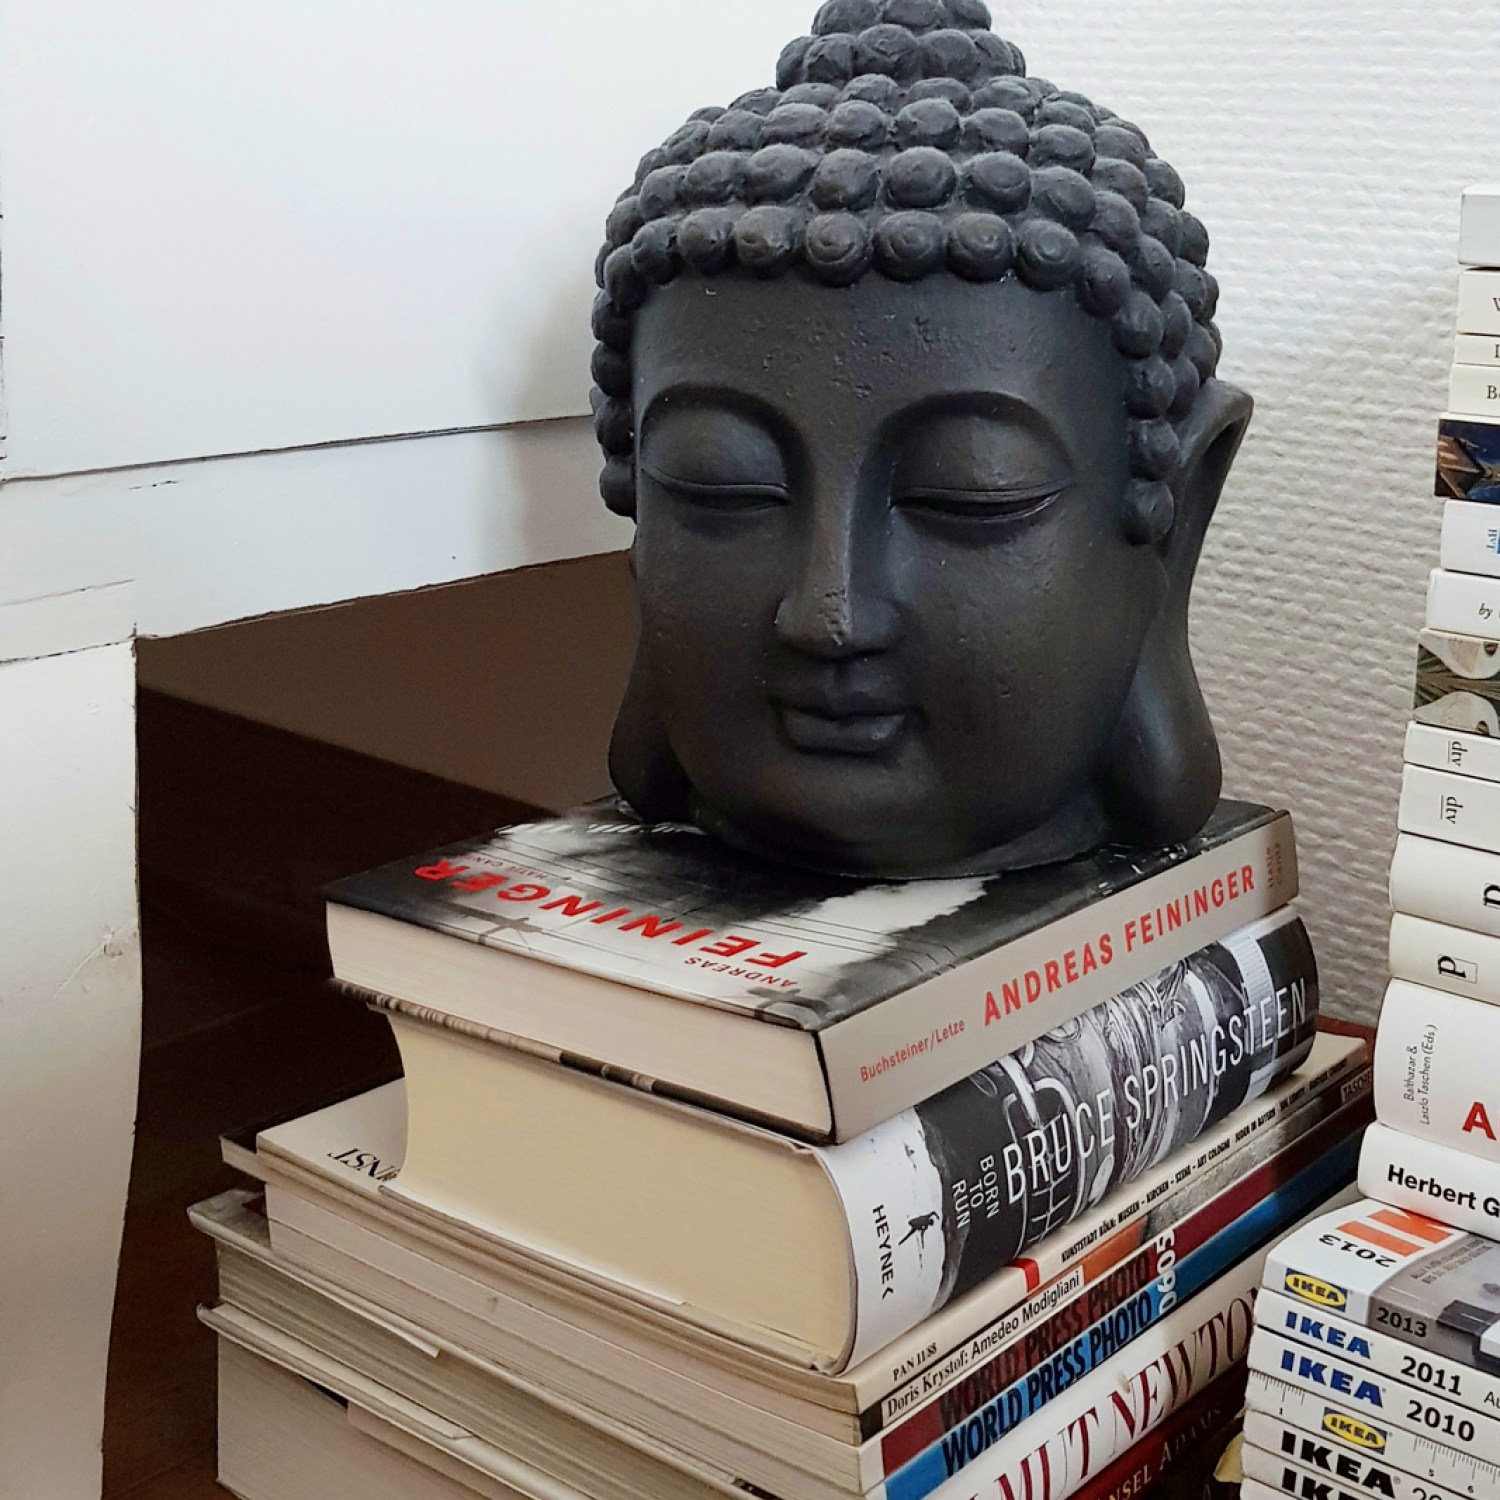 A gray buddha statue on a stack of white books, catalogs